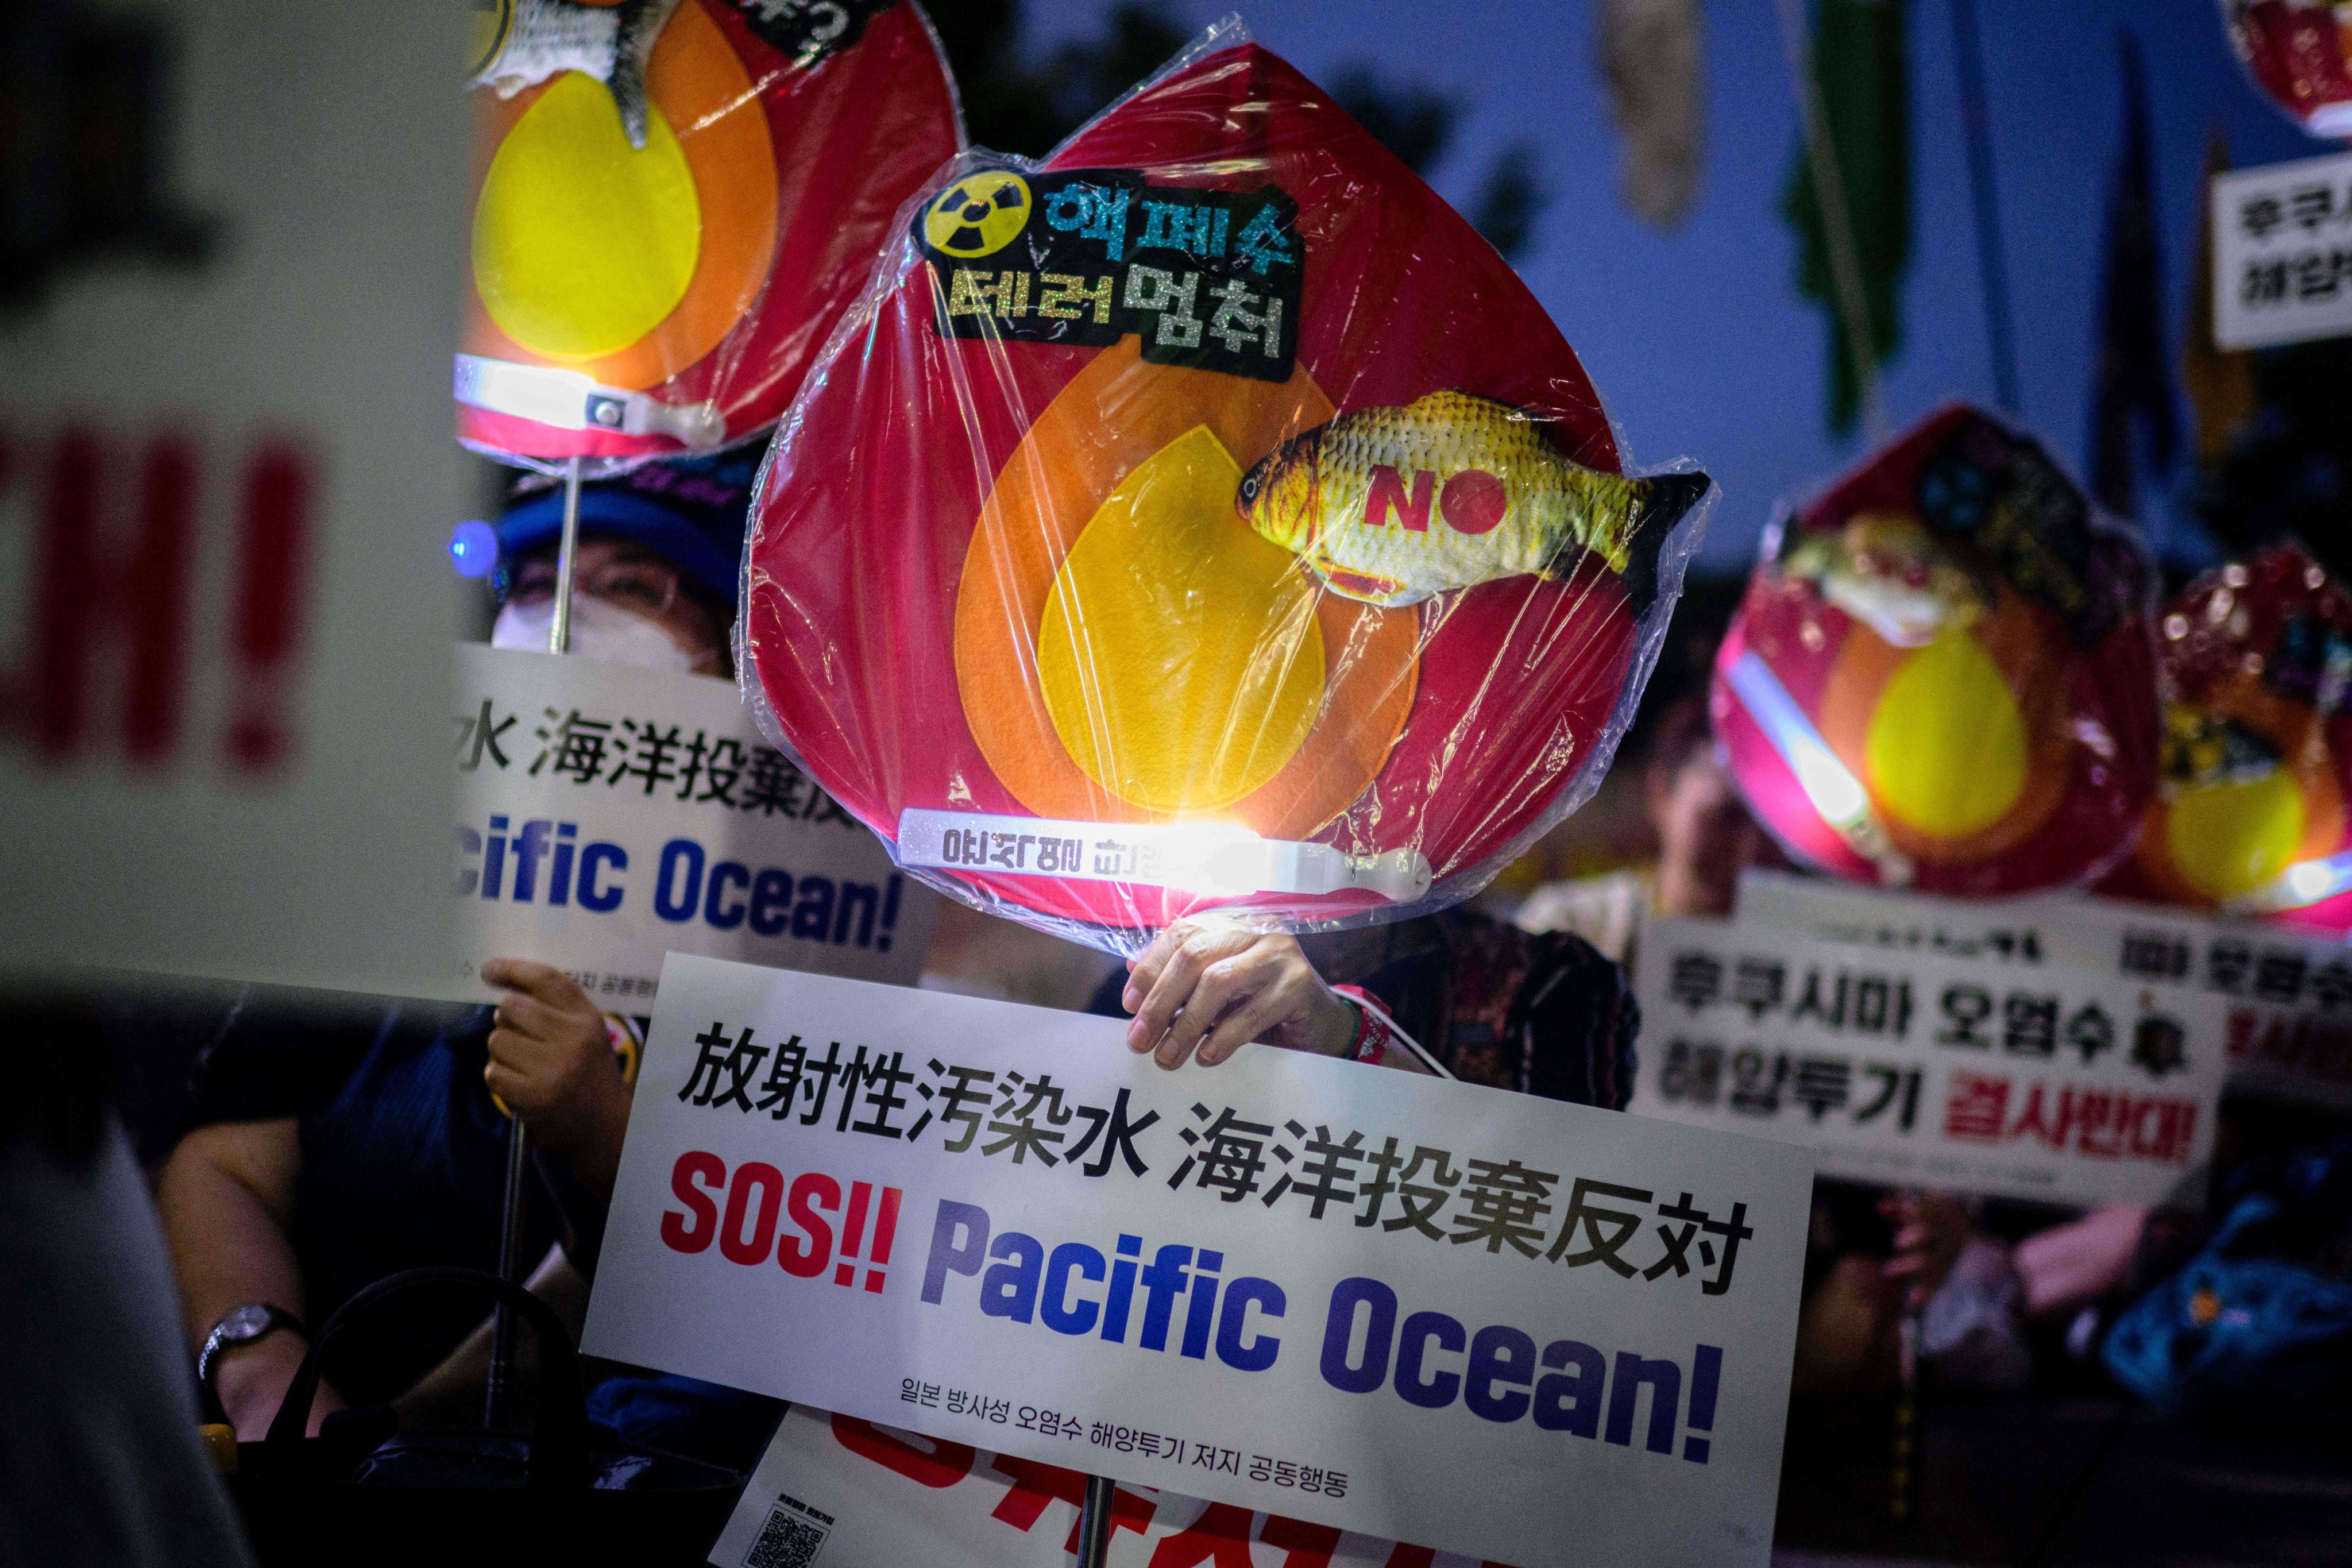 An activist holds a sign that reads “SOS!! Pacific Ocean!” during a protest outside City Hall in Seoul, South Korea on August 22, 2023 against the planned release of waste water from Japan’s Fukushima nuclear plant into the ocean. Photo: AFP